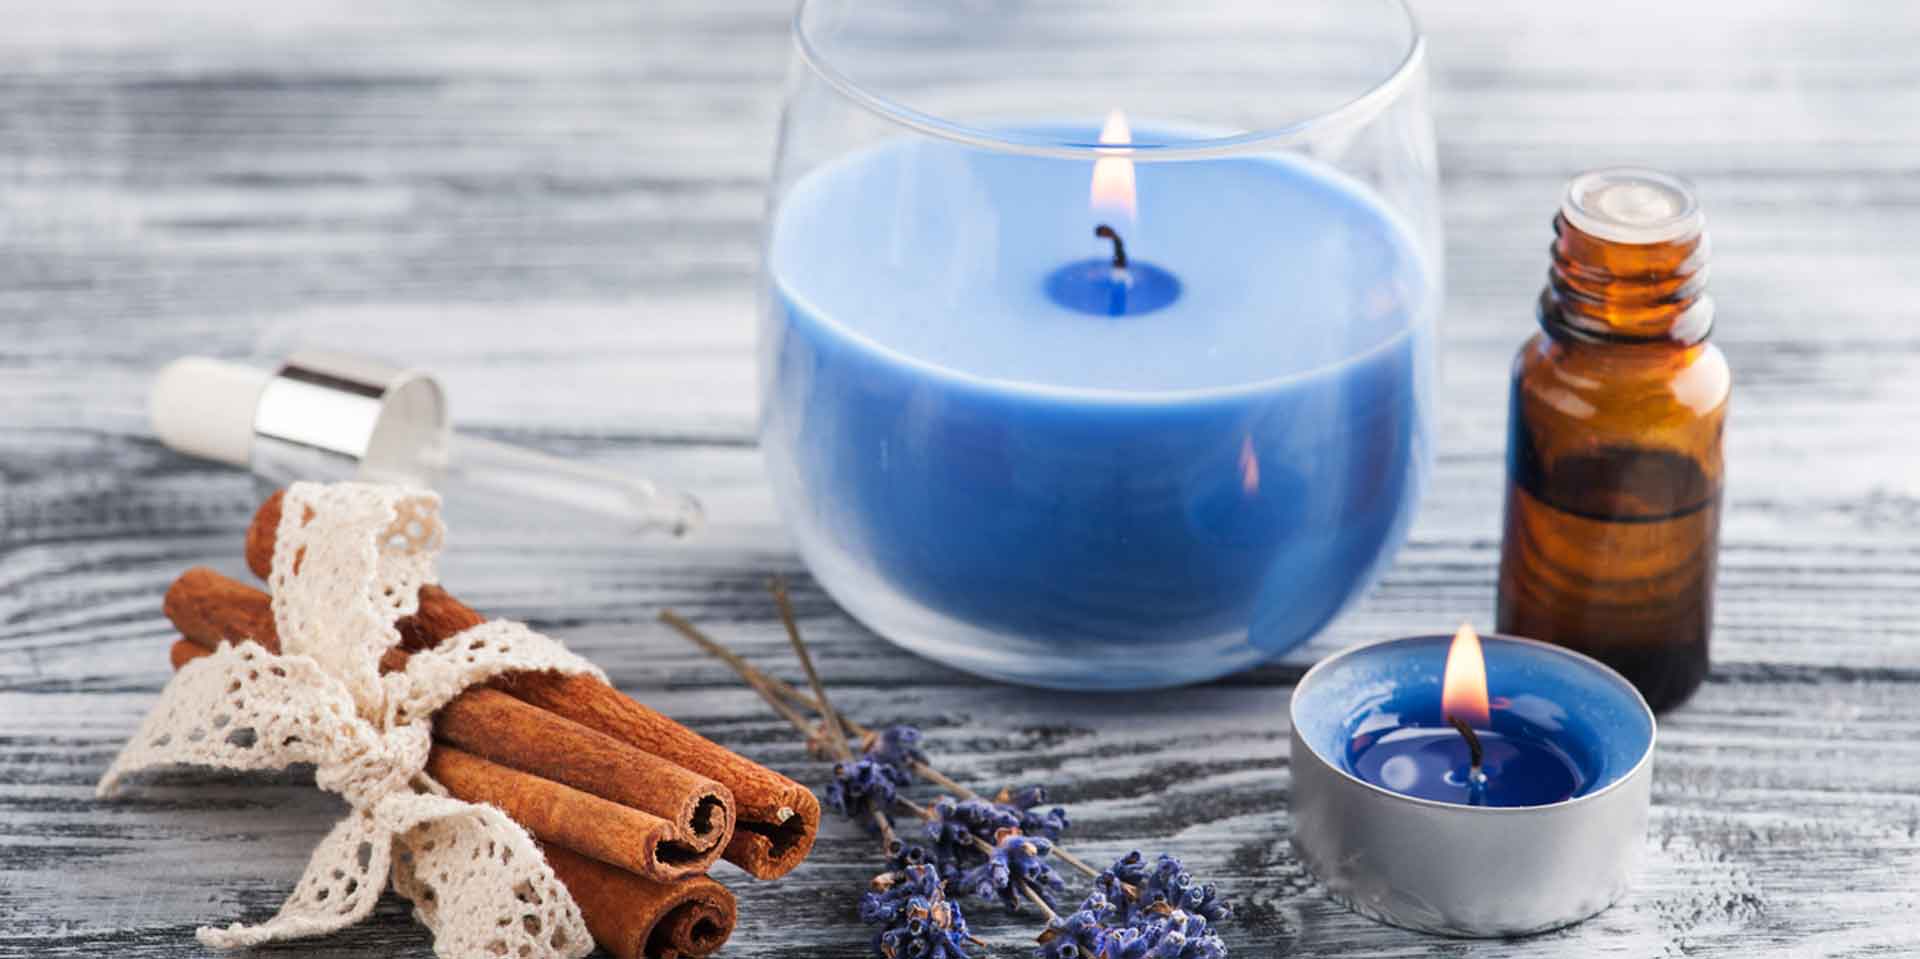 Two blue candles on a wooden table, surrounded by dried lavender, cinnamon sticks, and an essential oil bottle